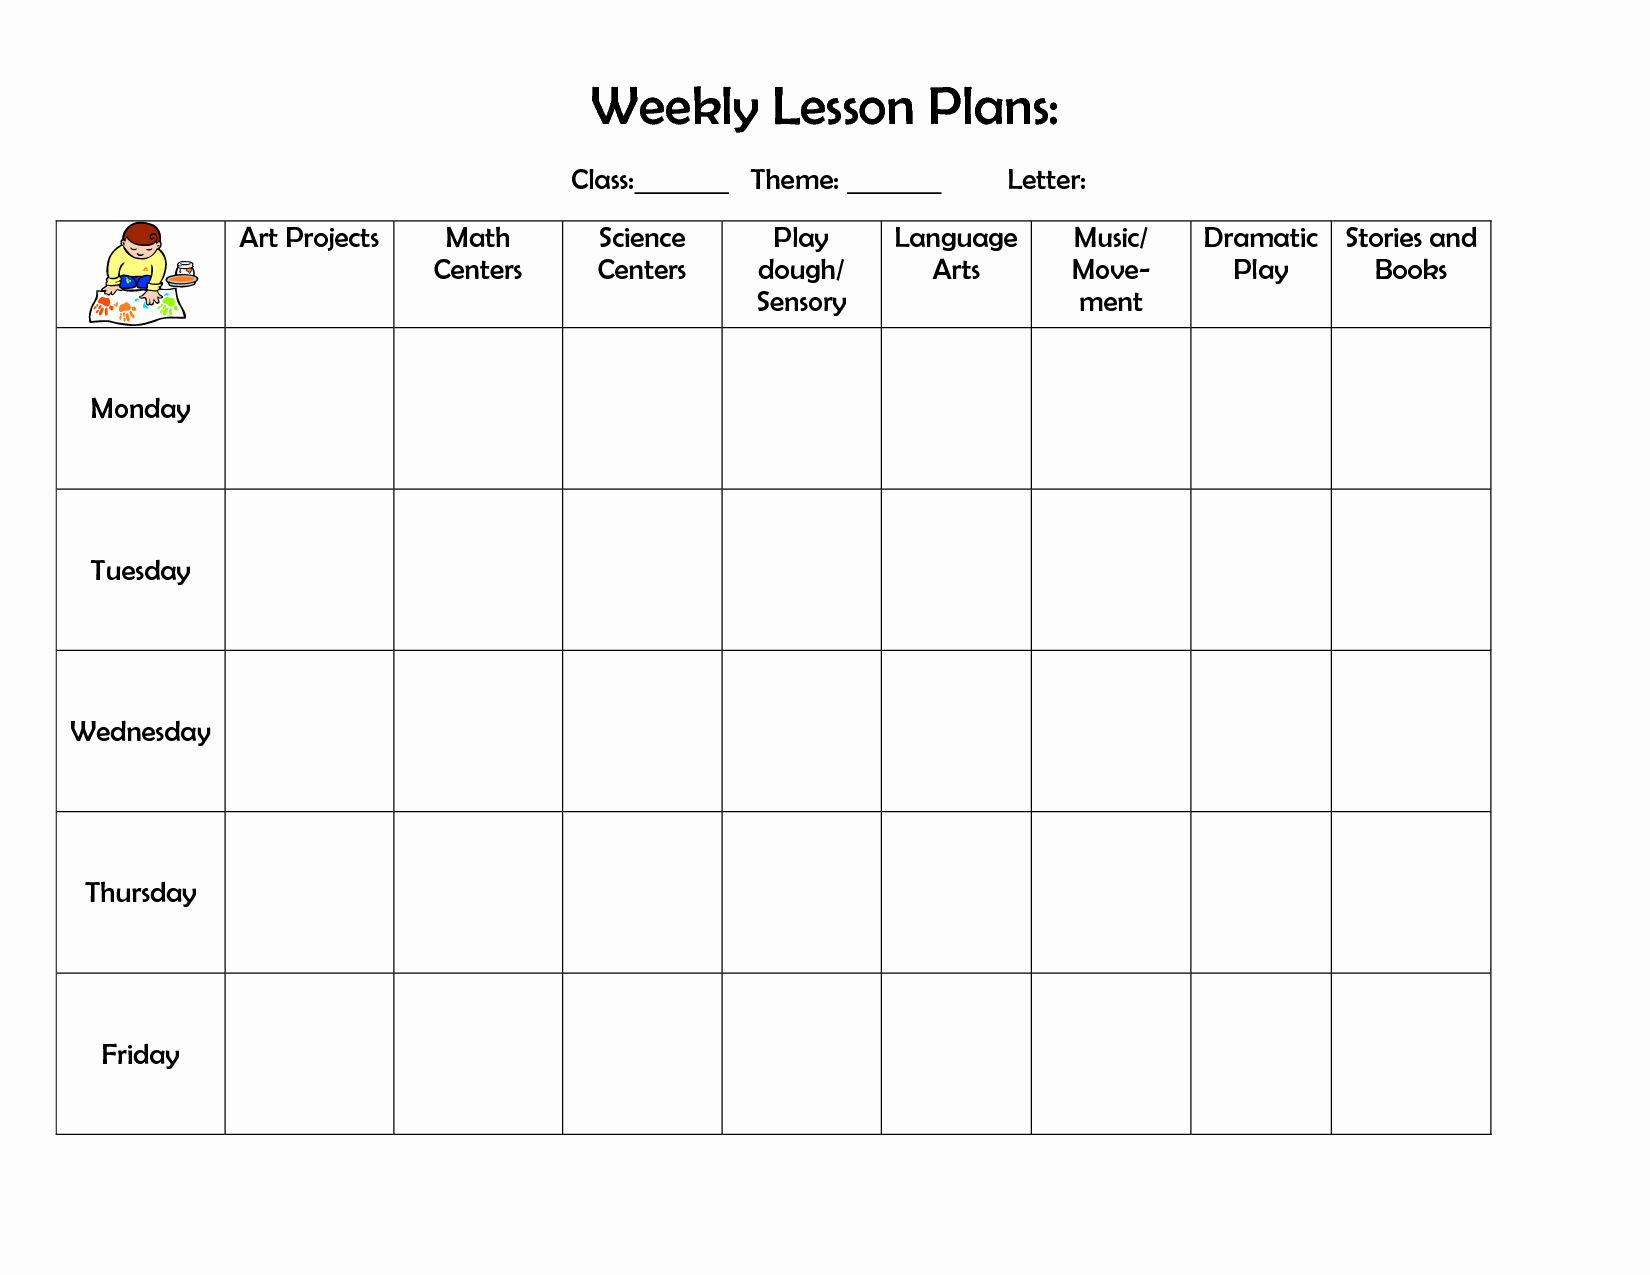 Blank Weekly Lesson Plan Template Fresh Infant Blank Lesson Plan Sheets